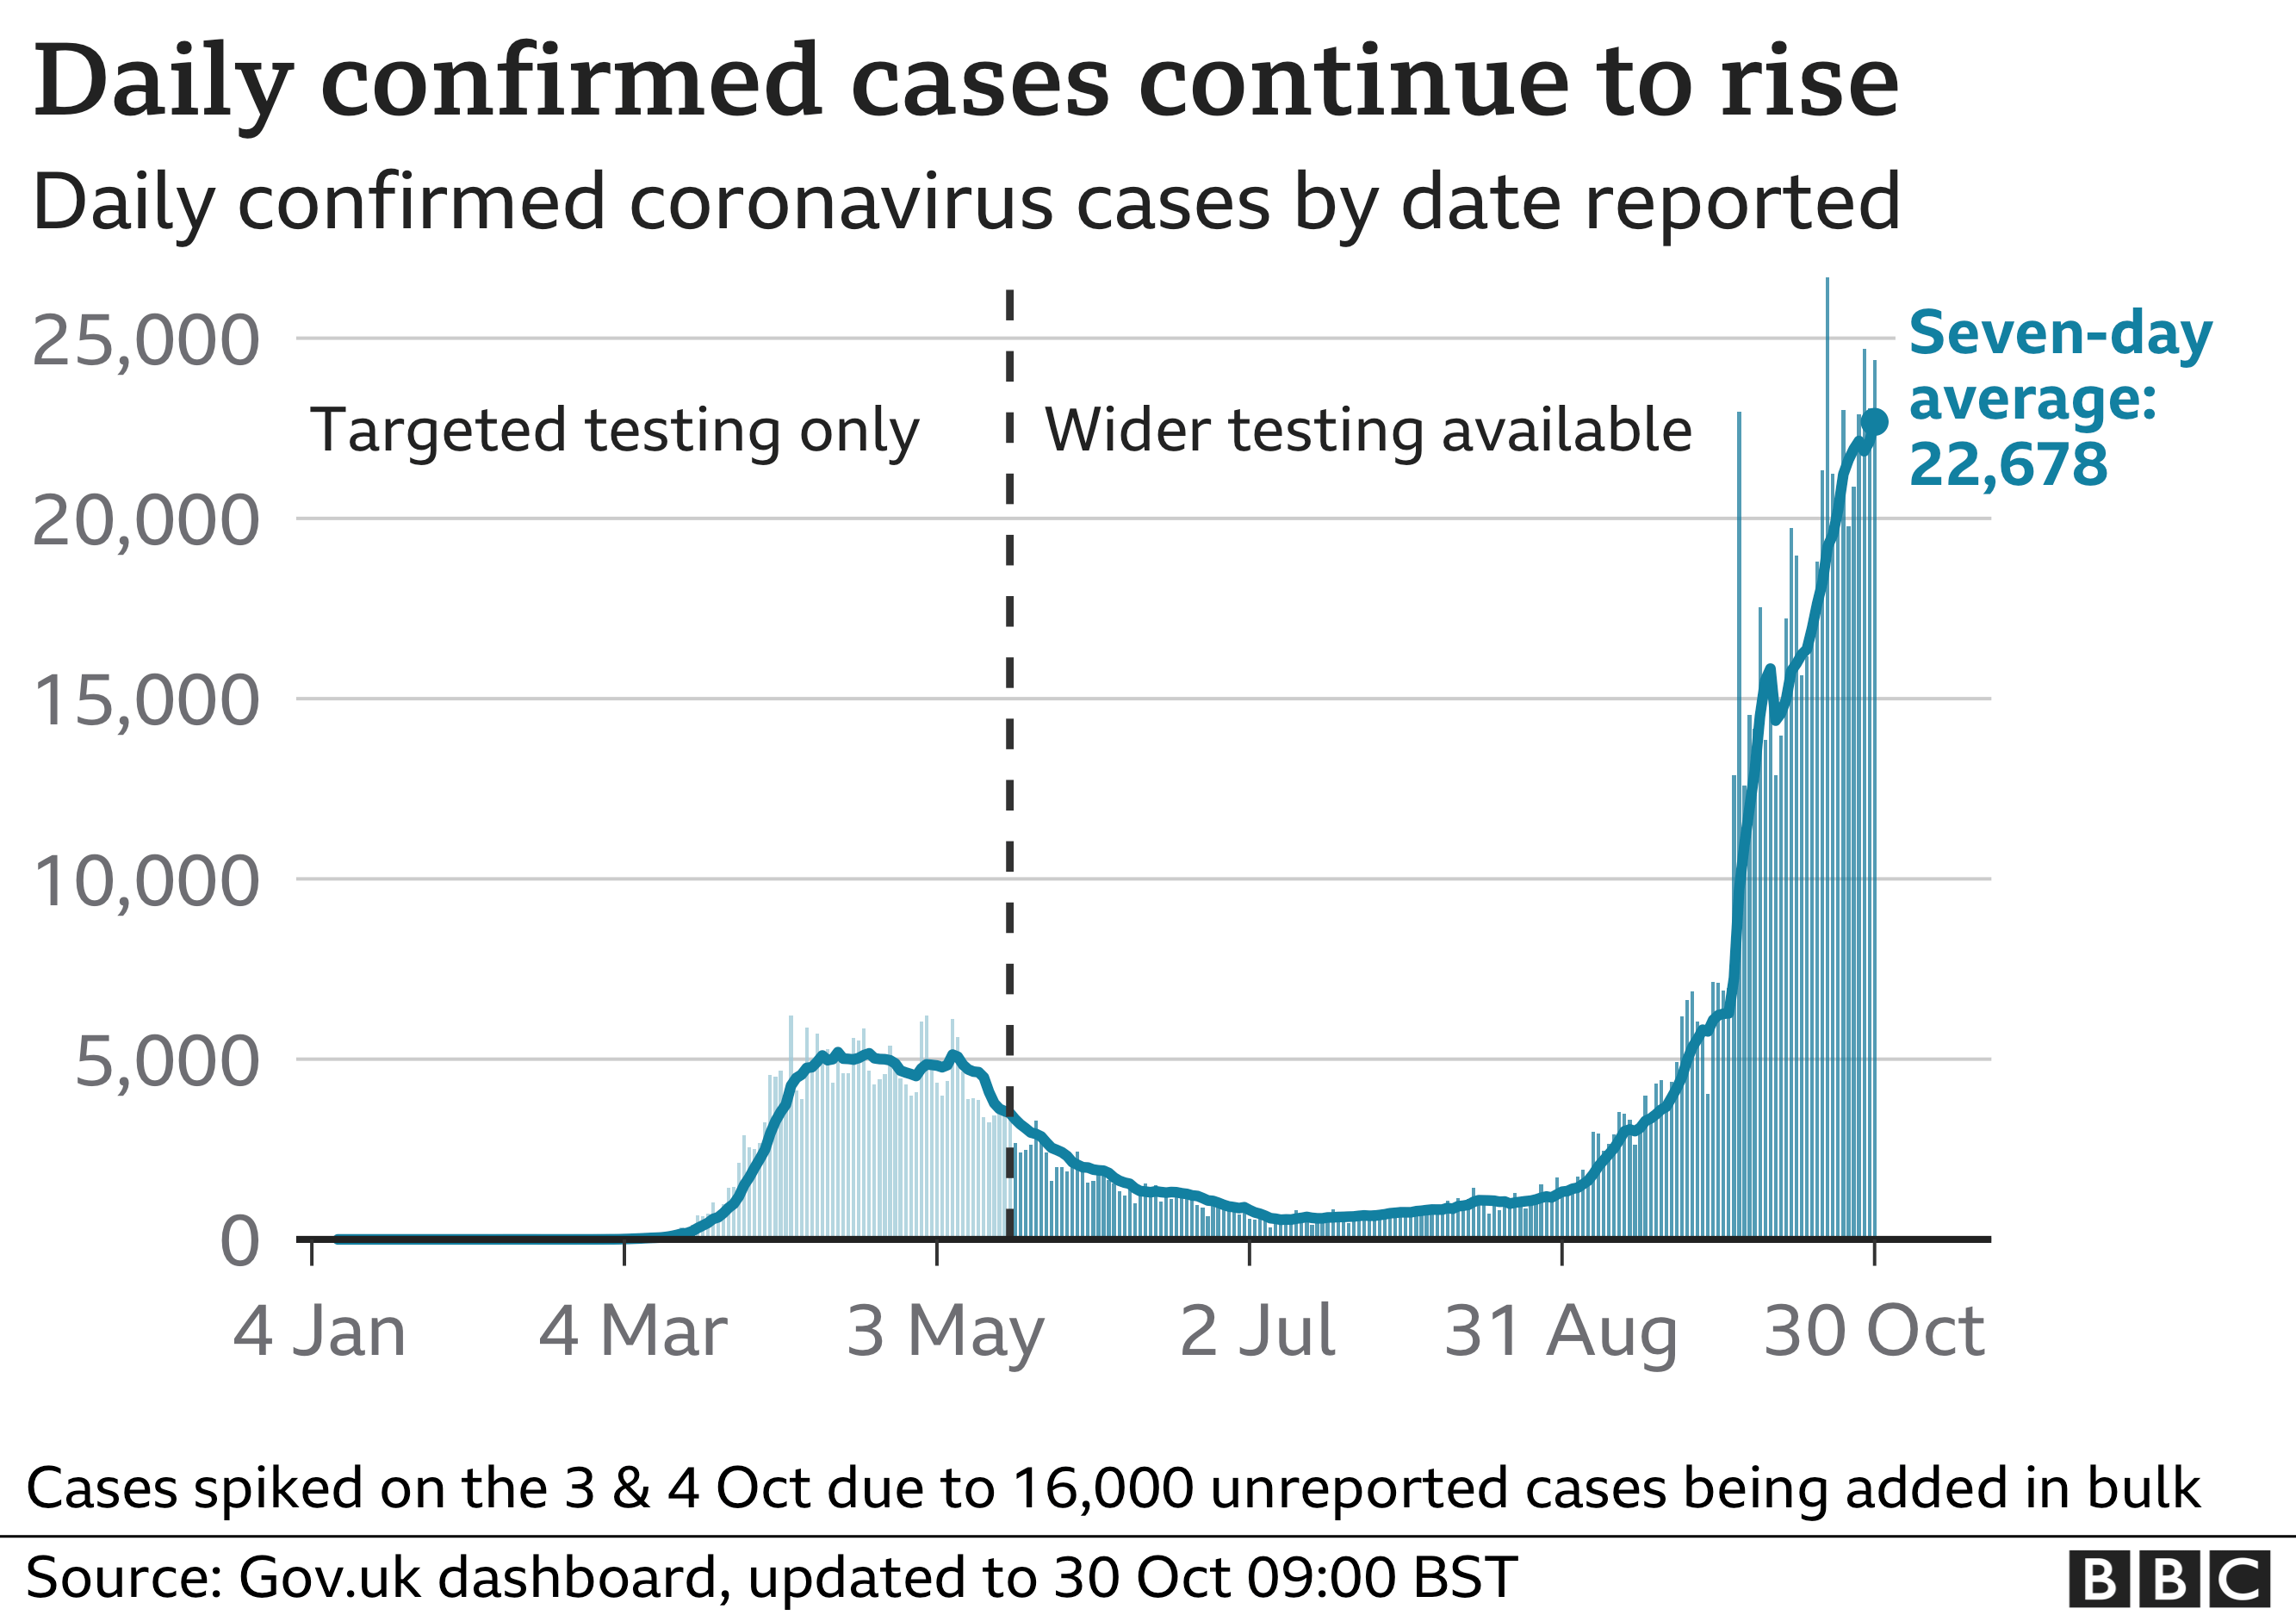 Chart shows cases are continuing to rise steeply